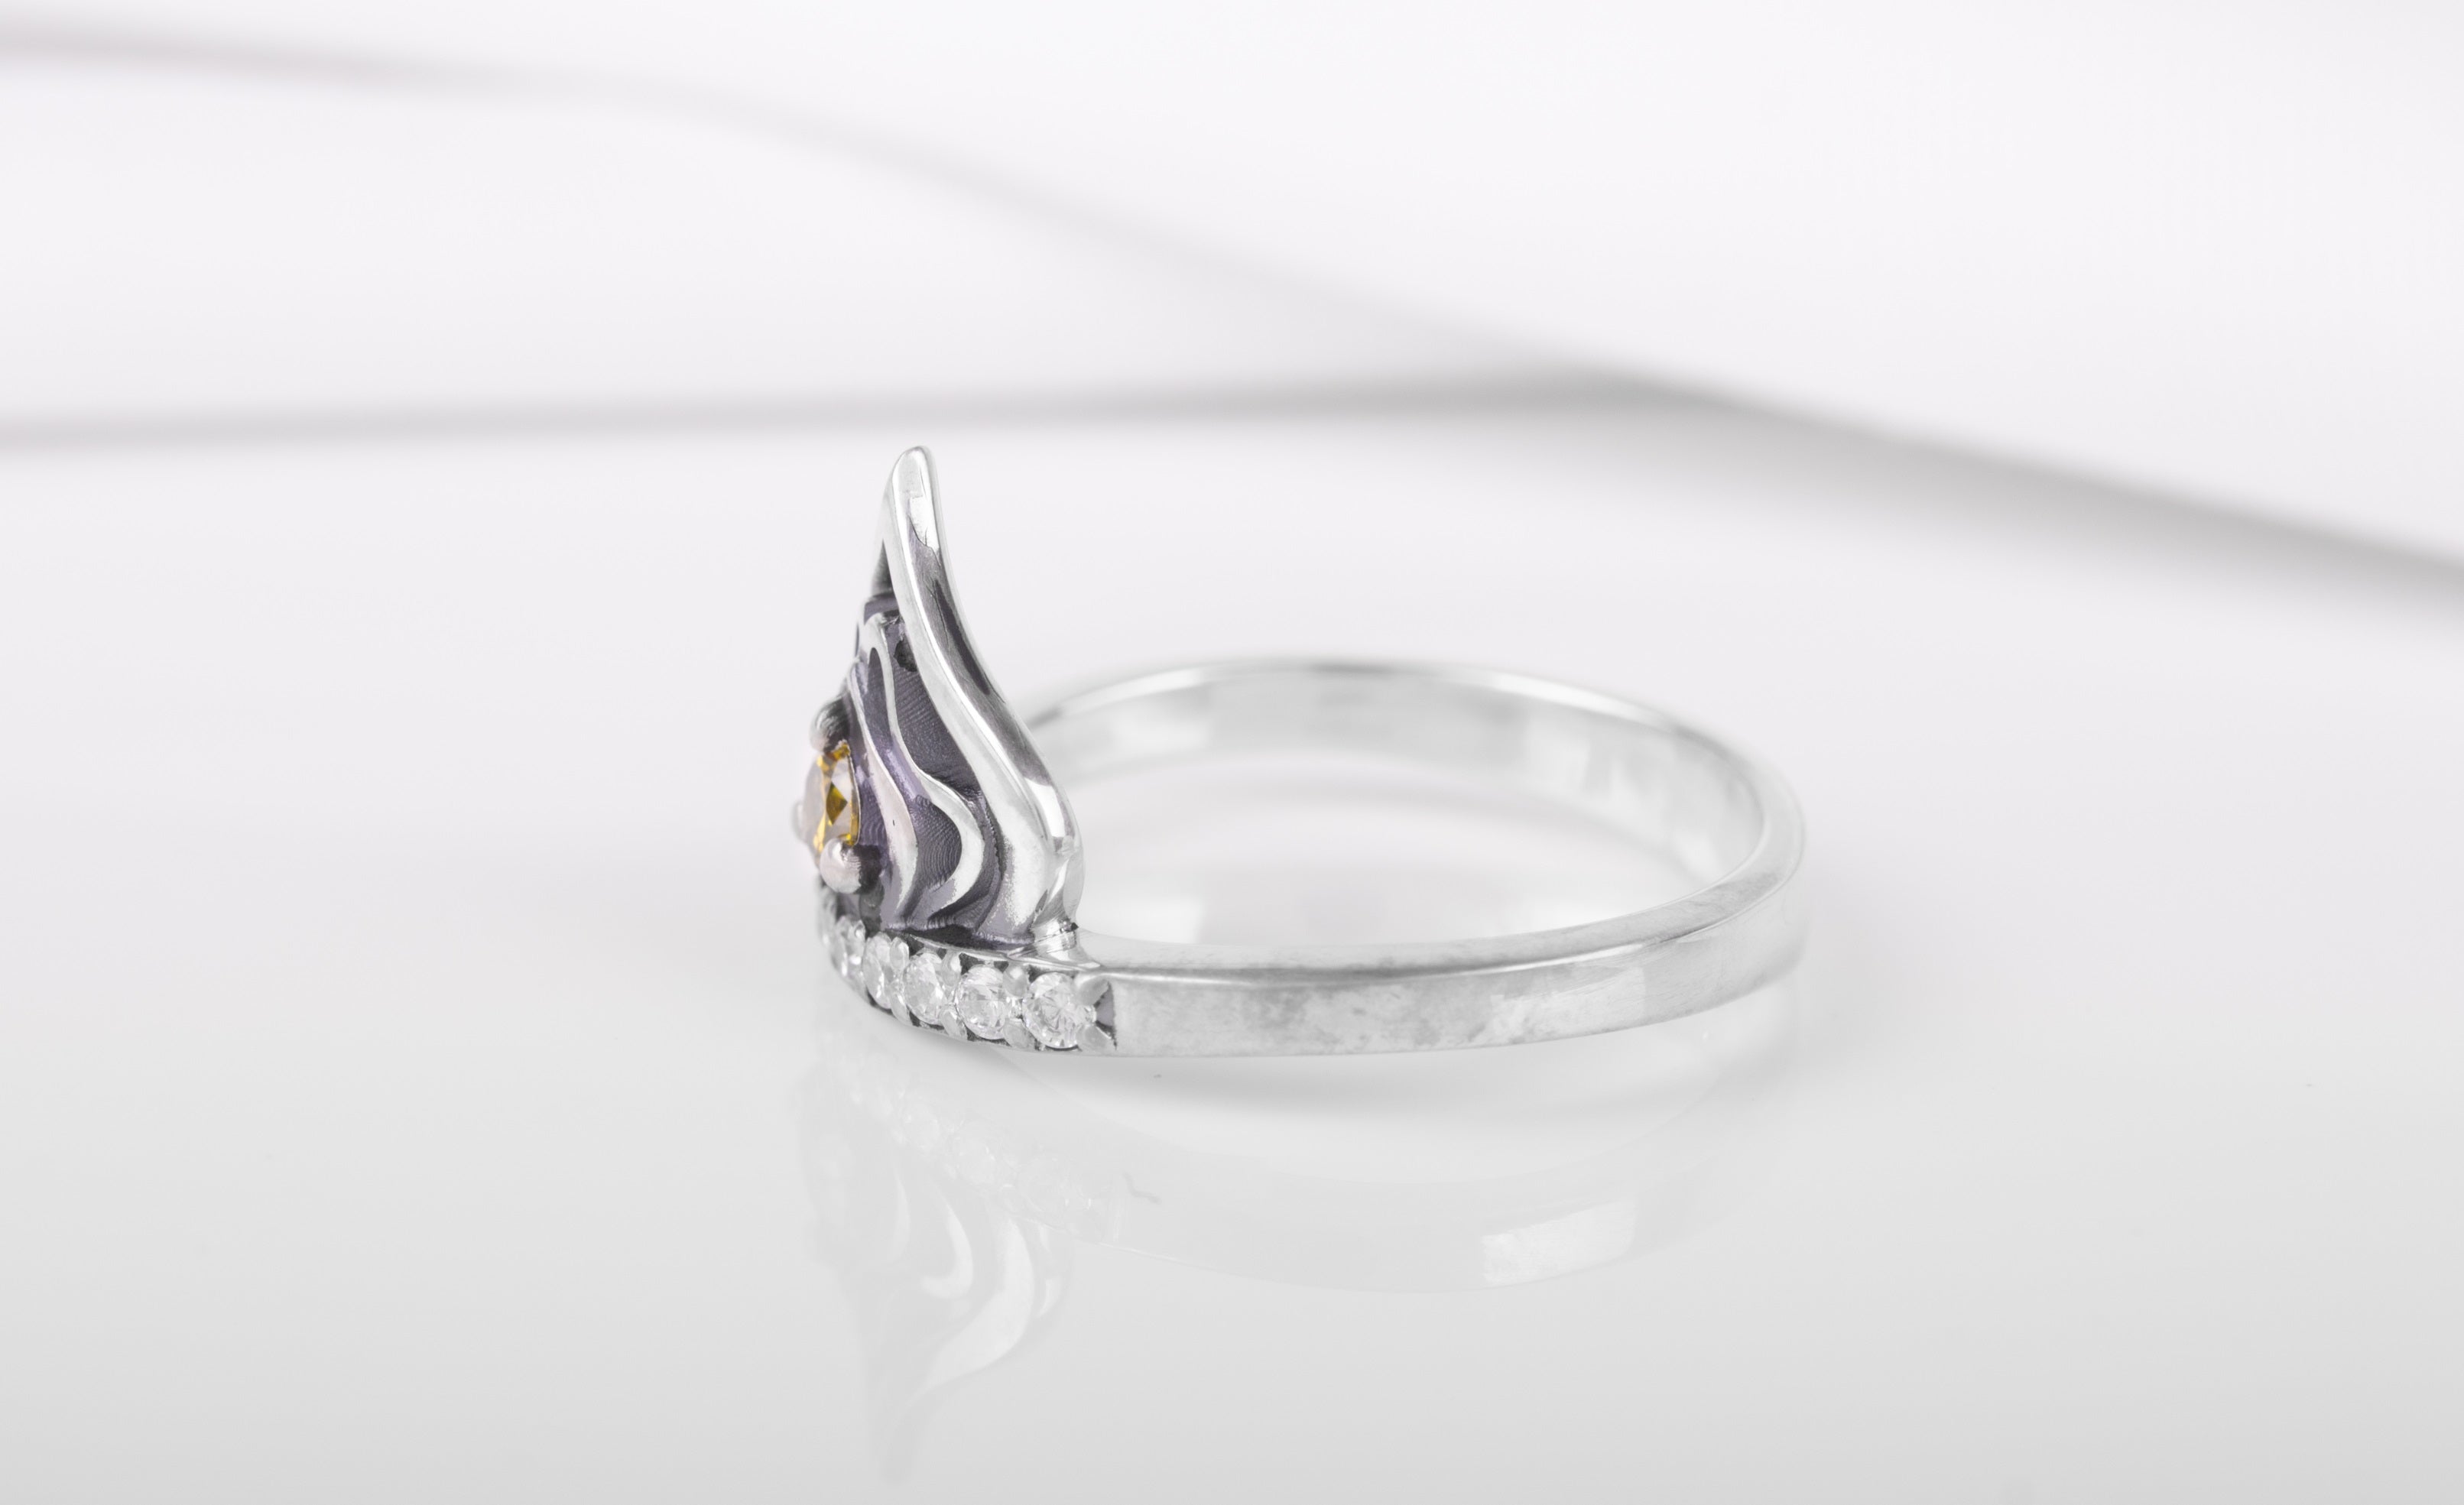 925 Silver Tiny Fashion Crown Ring with gems, Unique Handmade Jewelry - vikingworkshop